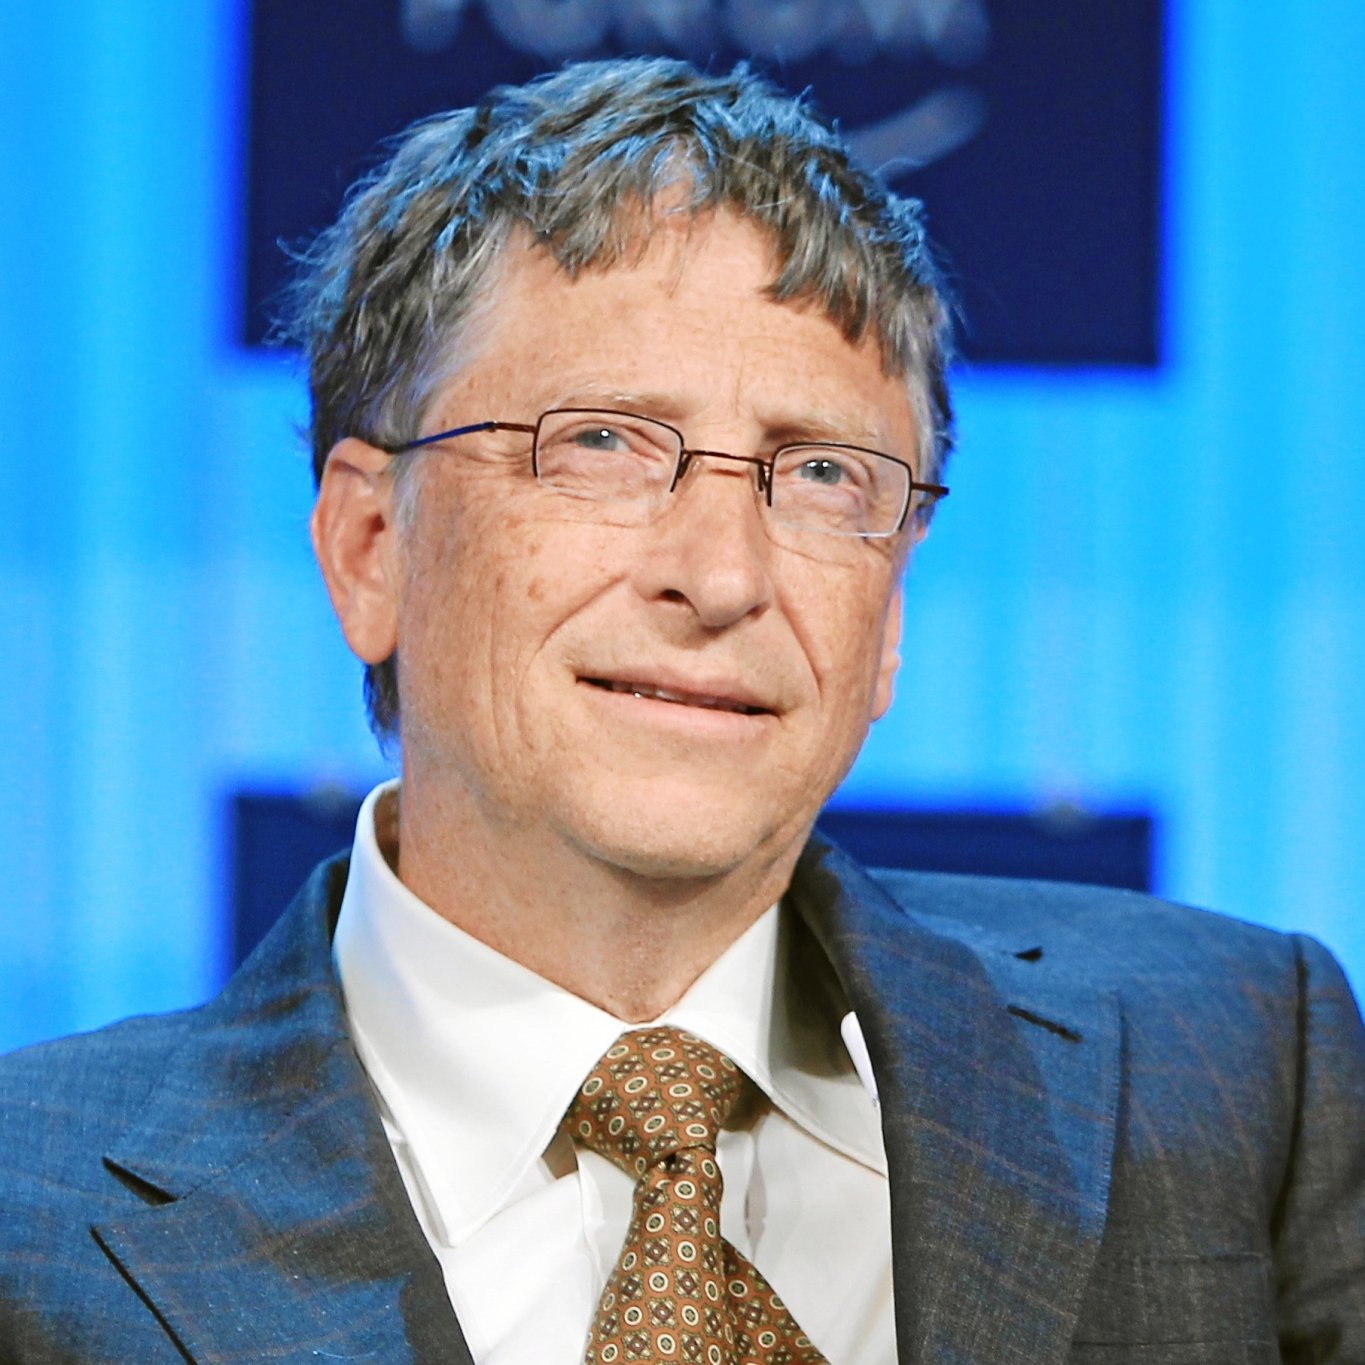 Today we wish Bill Gates a Happy Birthday! Read a summary of his life here:  